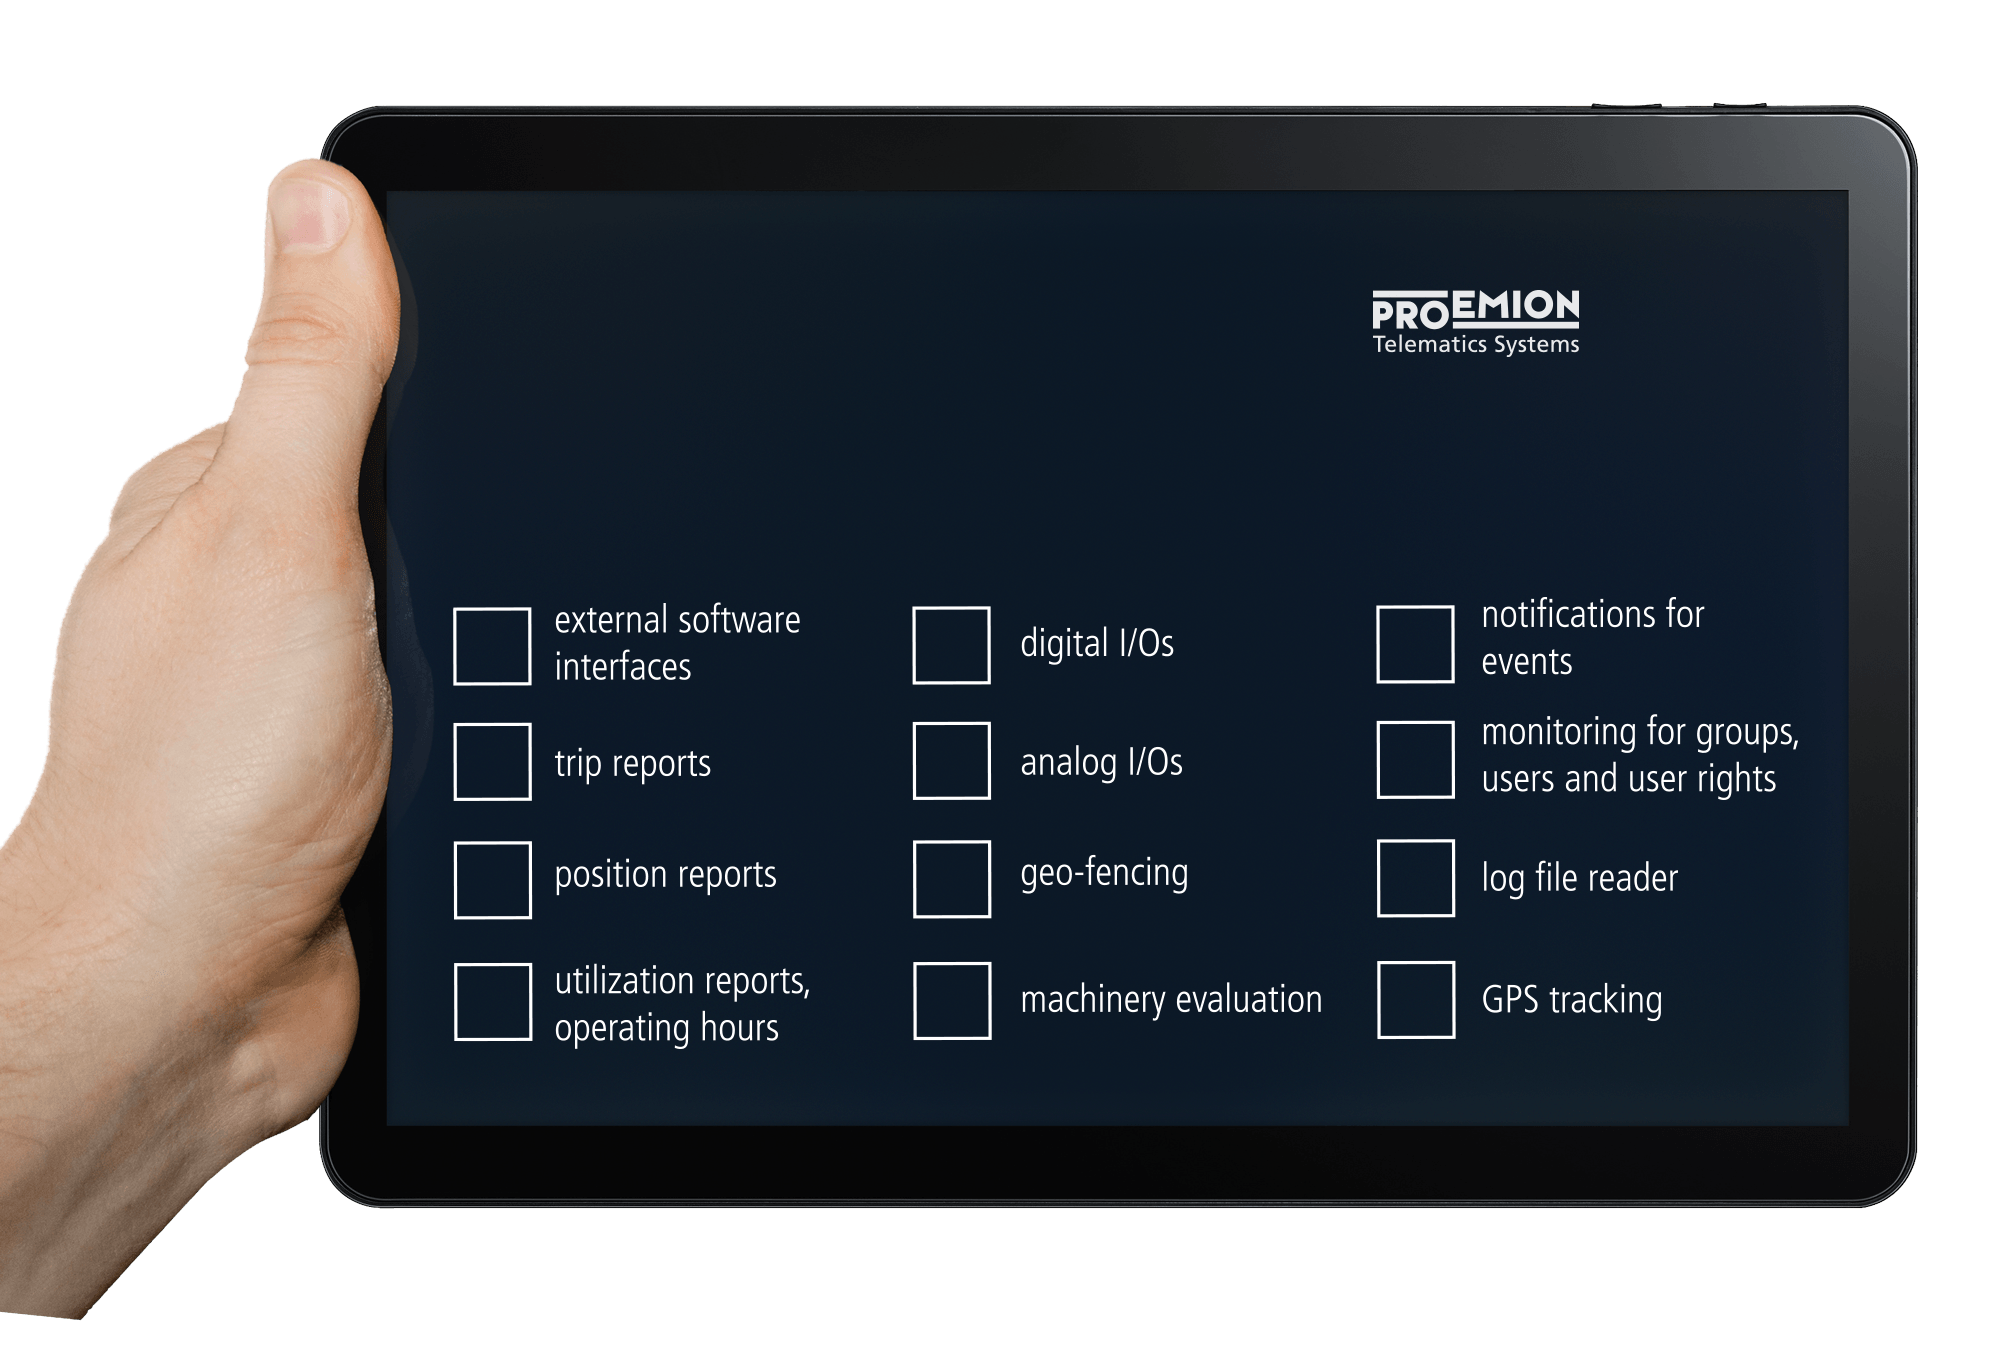 Tablet In Hand Png Image PNG Image